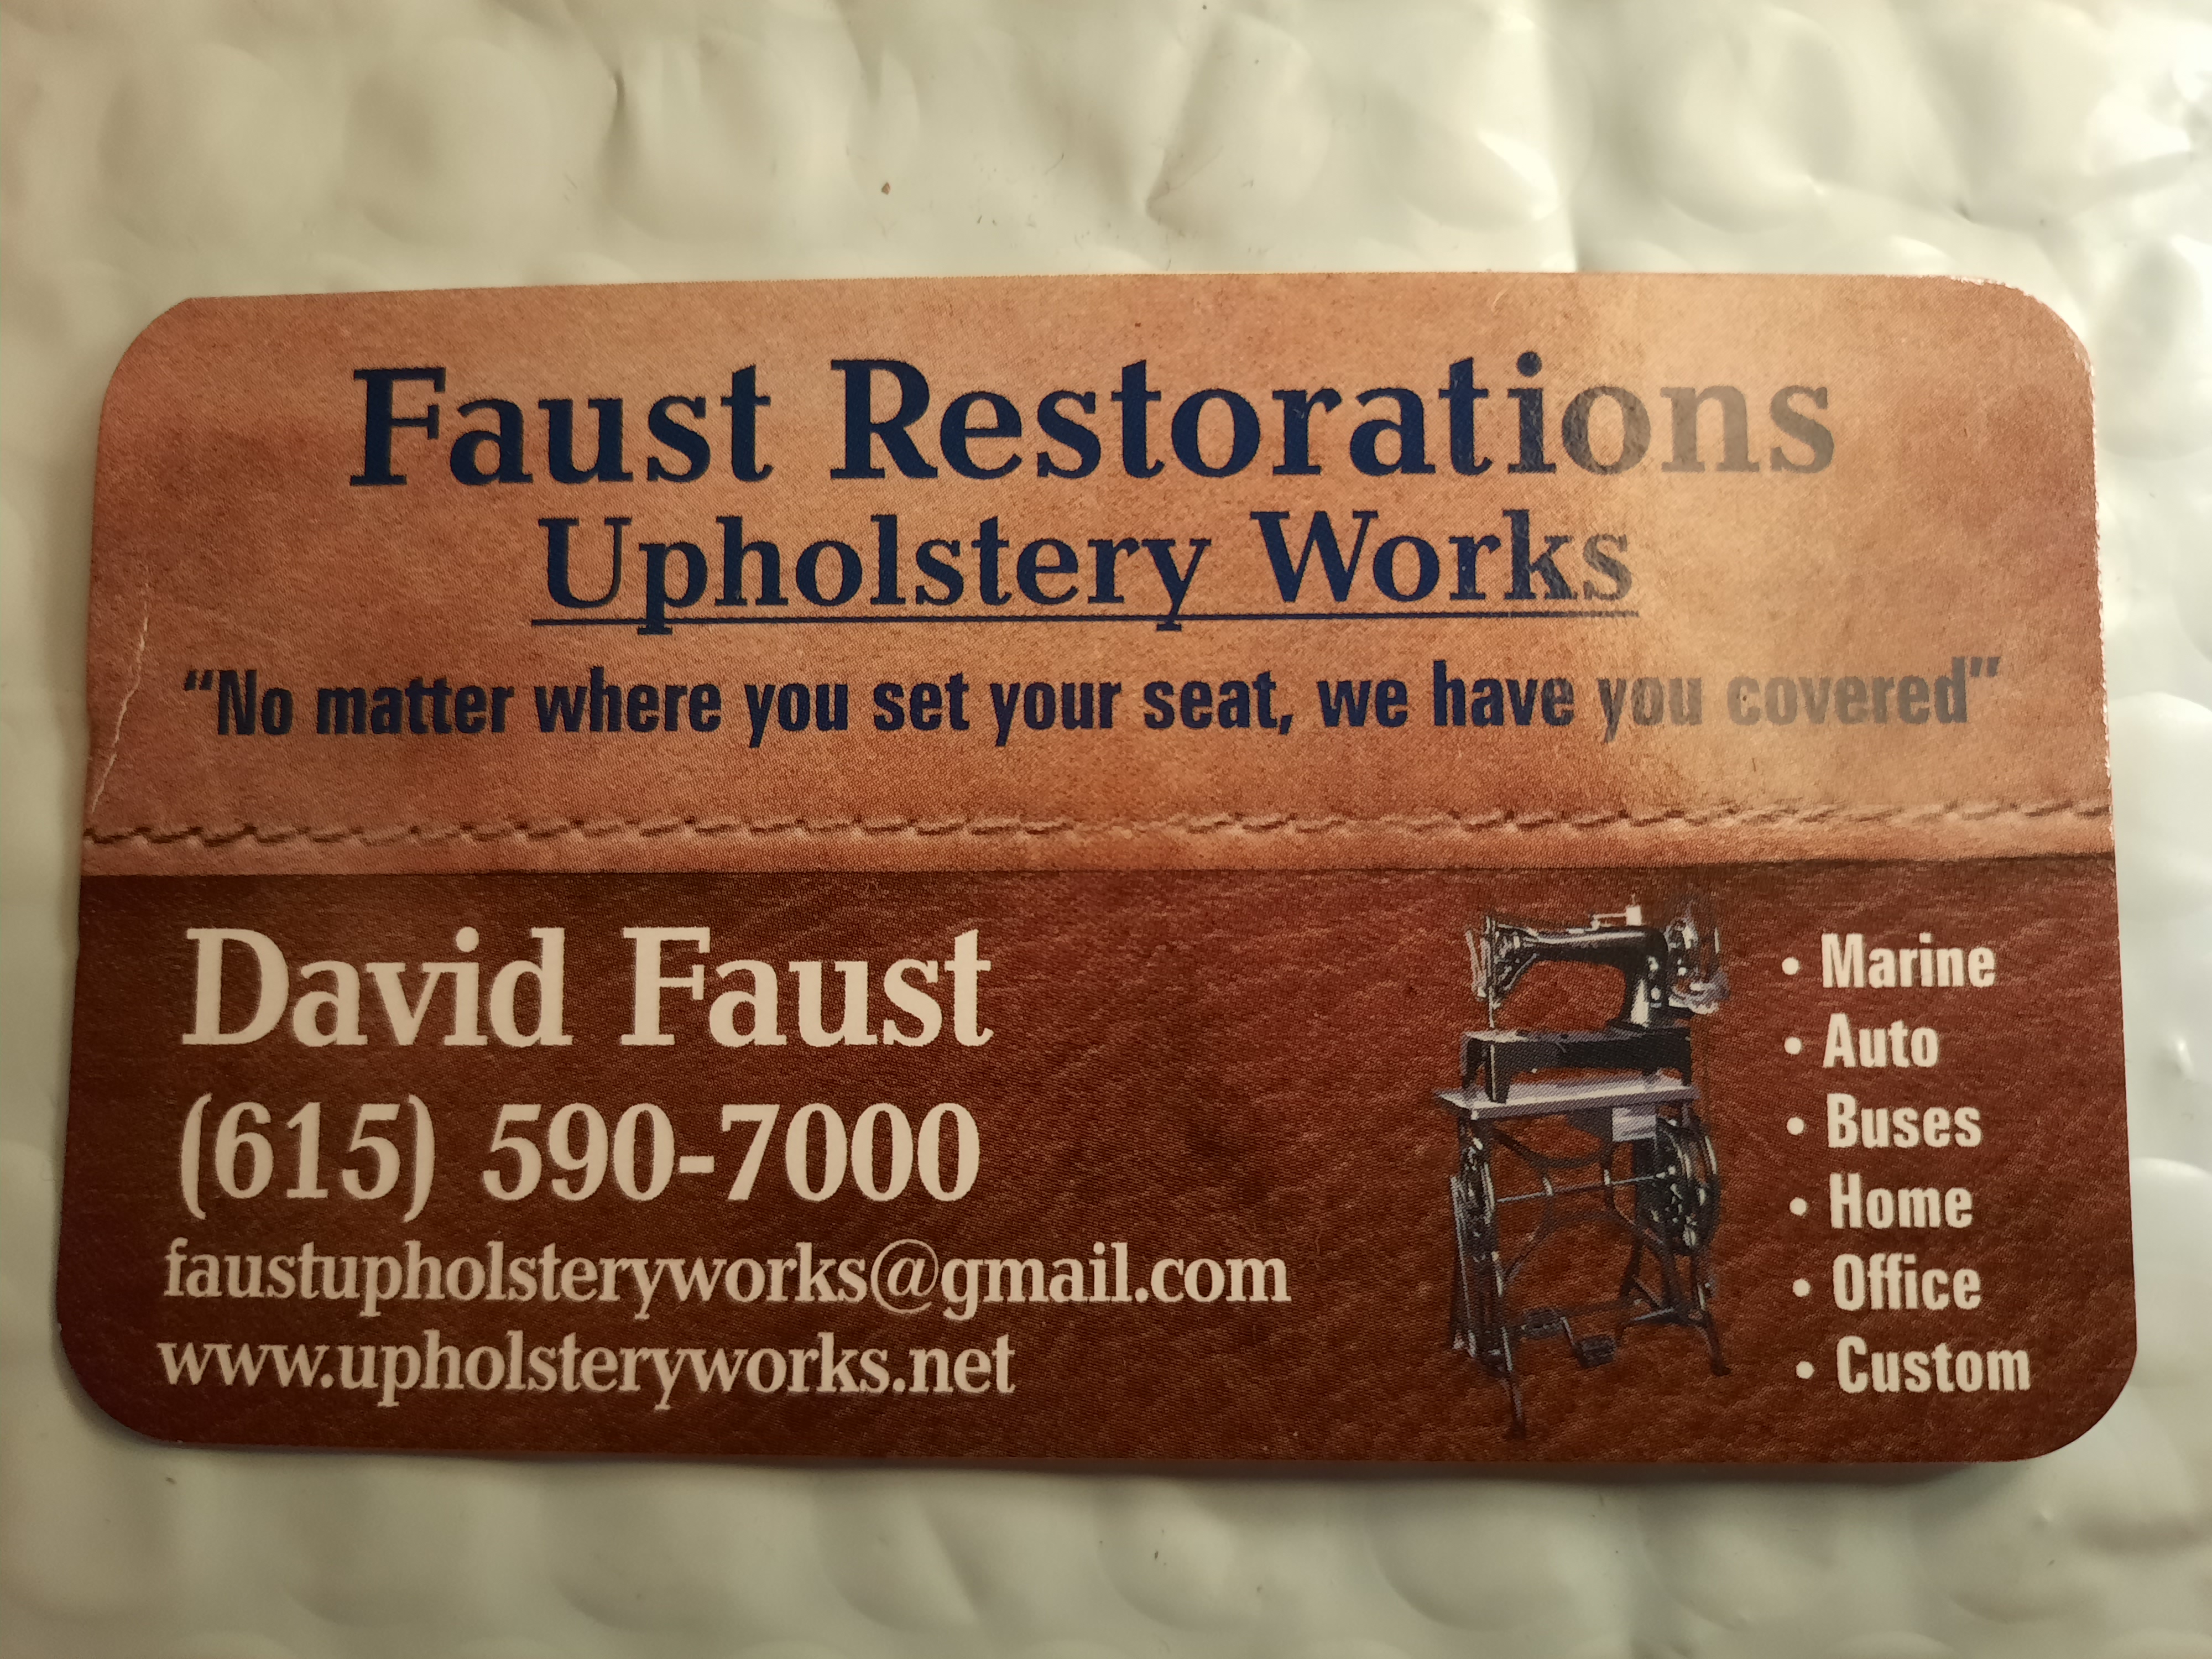 Faust Restorations Upholstery Works Logo